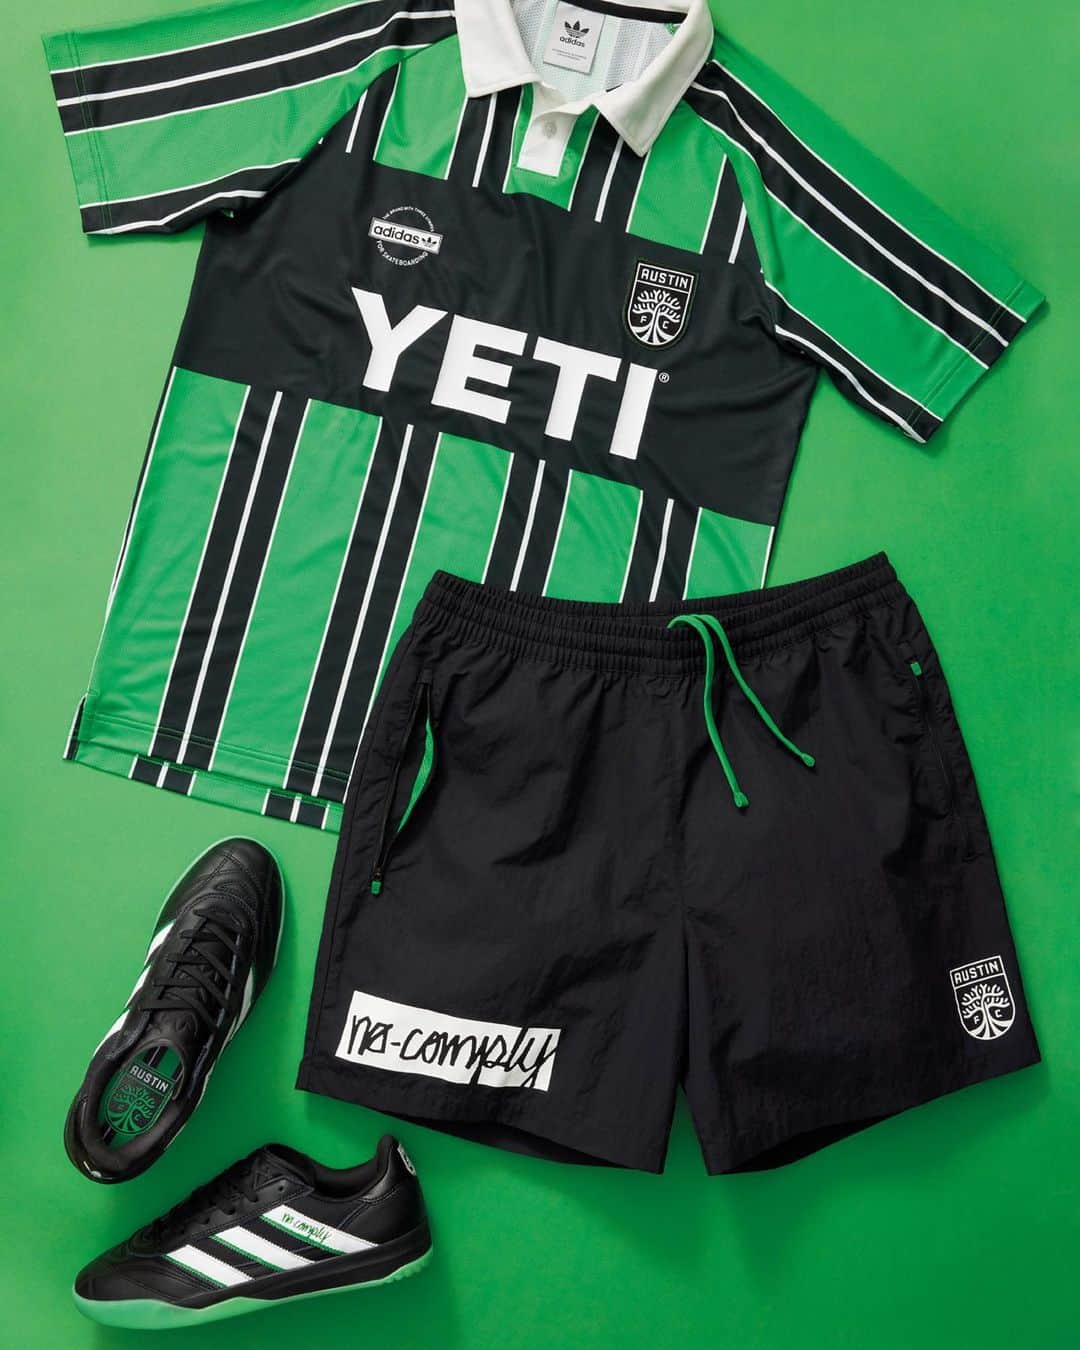 adidas Skateboardingのインスタグラム：「💚💚 /// The No-Comply x Austin FC collection by adidas Skateboarding is available now in limited quantities @nocomplyatx, adidas.com/skateboarding and in select skate shops worldwide.  The collection features a 90s-inspired oversized No-Comply x Austin FC Jersey & Water Short, and a premium leather Copa Nationale rooted in the football club’s color palette. 🧤⚽️  Available at these store locations: @orchardshop @303boards @35thnorth @510skateshop @alumniskateboarding @atlasskateboarding @blacksheepskateshop @brandedskate @east4thskate @familiaskate @humiditynola @laborskateshop @njskateshop @nocomplyatx @plaskate @premierskate @blacklist_lbg @rukus103 @seasonsskateshop @sel_ect @silo_omaha @spottampa @wearecivil @stratosphereskateboards @subsect @upriseskateshop @ups_skateshop @fasttimes @boardertown @premierskate  #adidasSkateboarding #NoComplyATX #Verde #listos #mls」